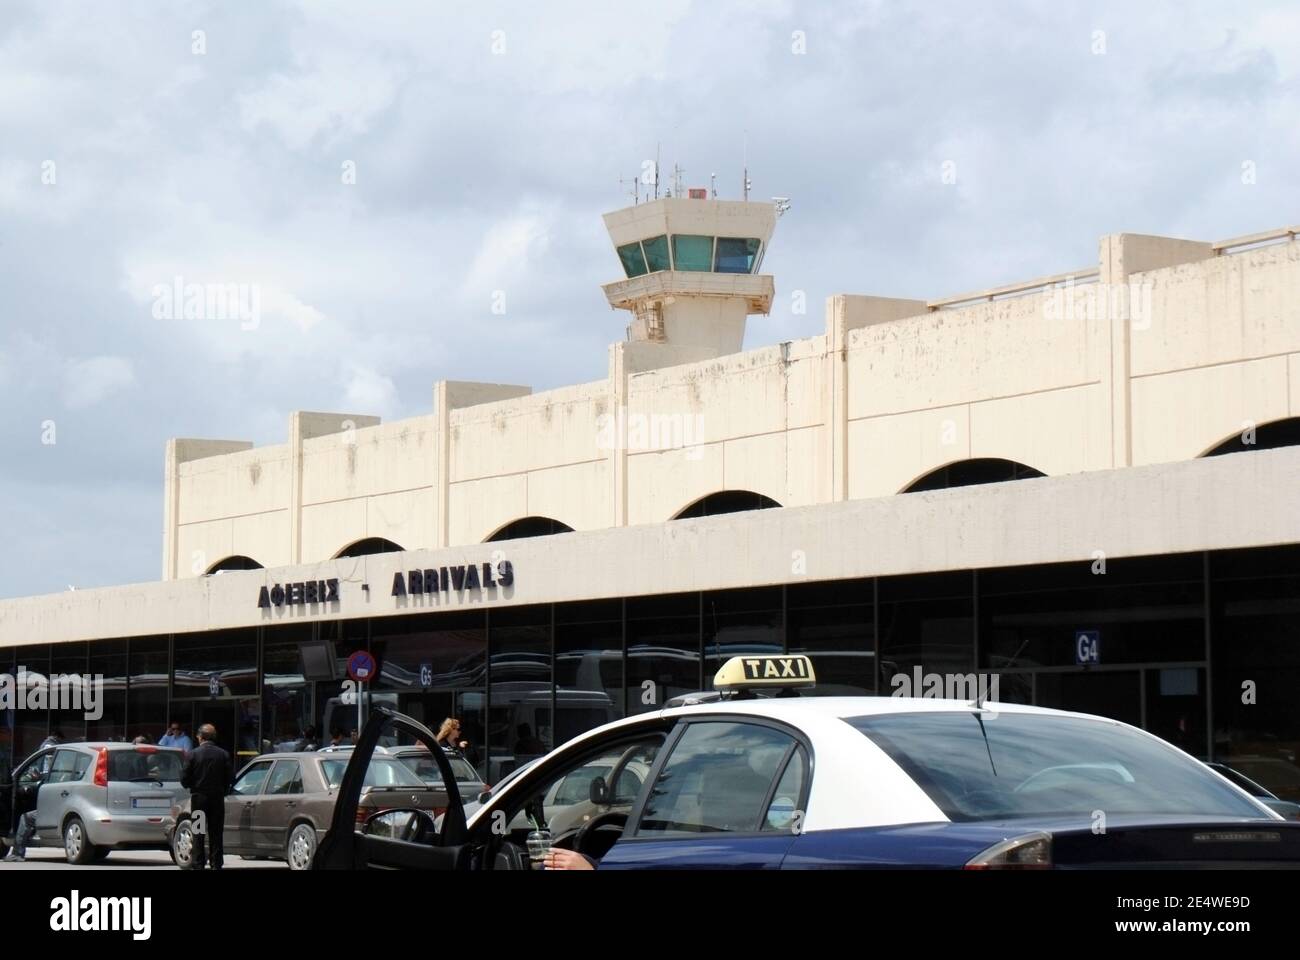 Rhodes International Airport terminal building viewed from the outside. Stock Photo